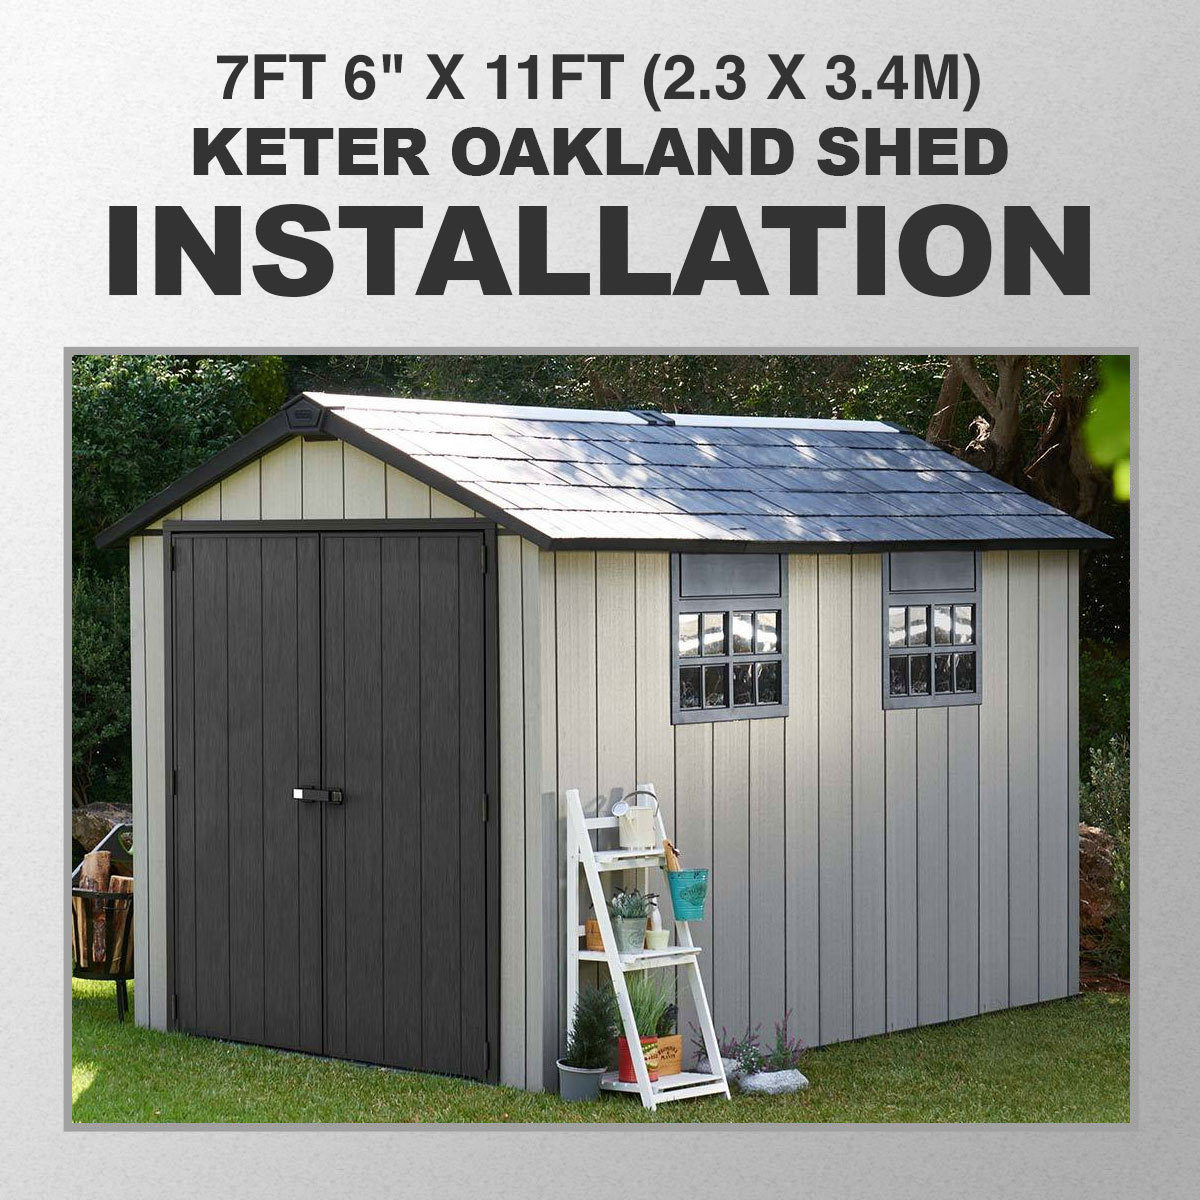 Installation for Keter Oakland 7ft 6" x 11ft (2.3 x 3.4m) Shed